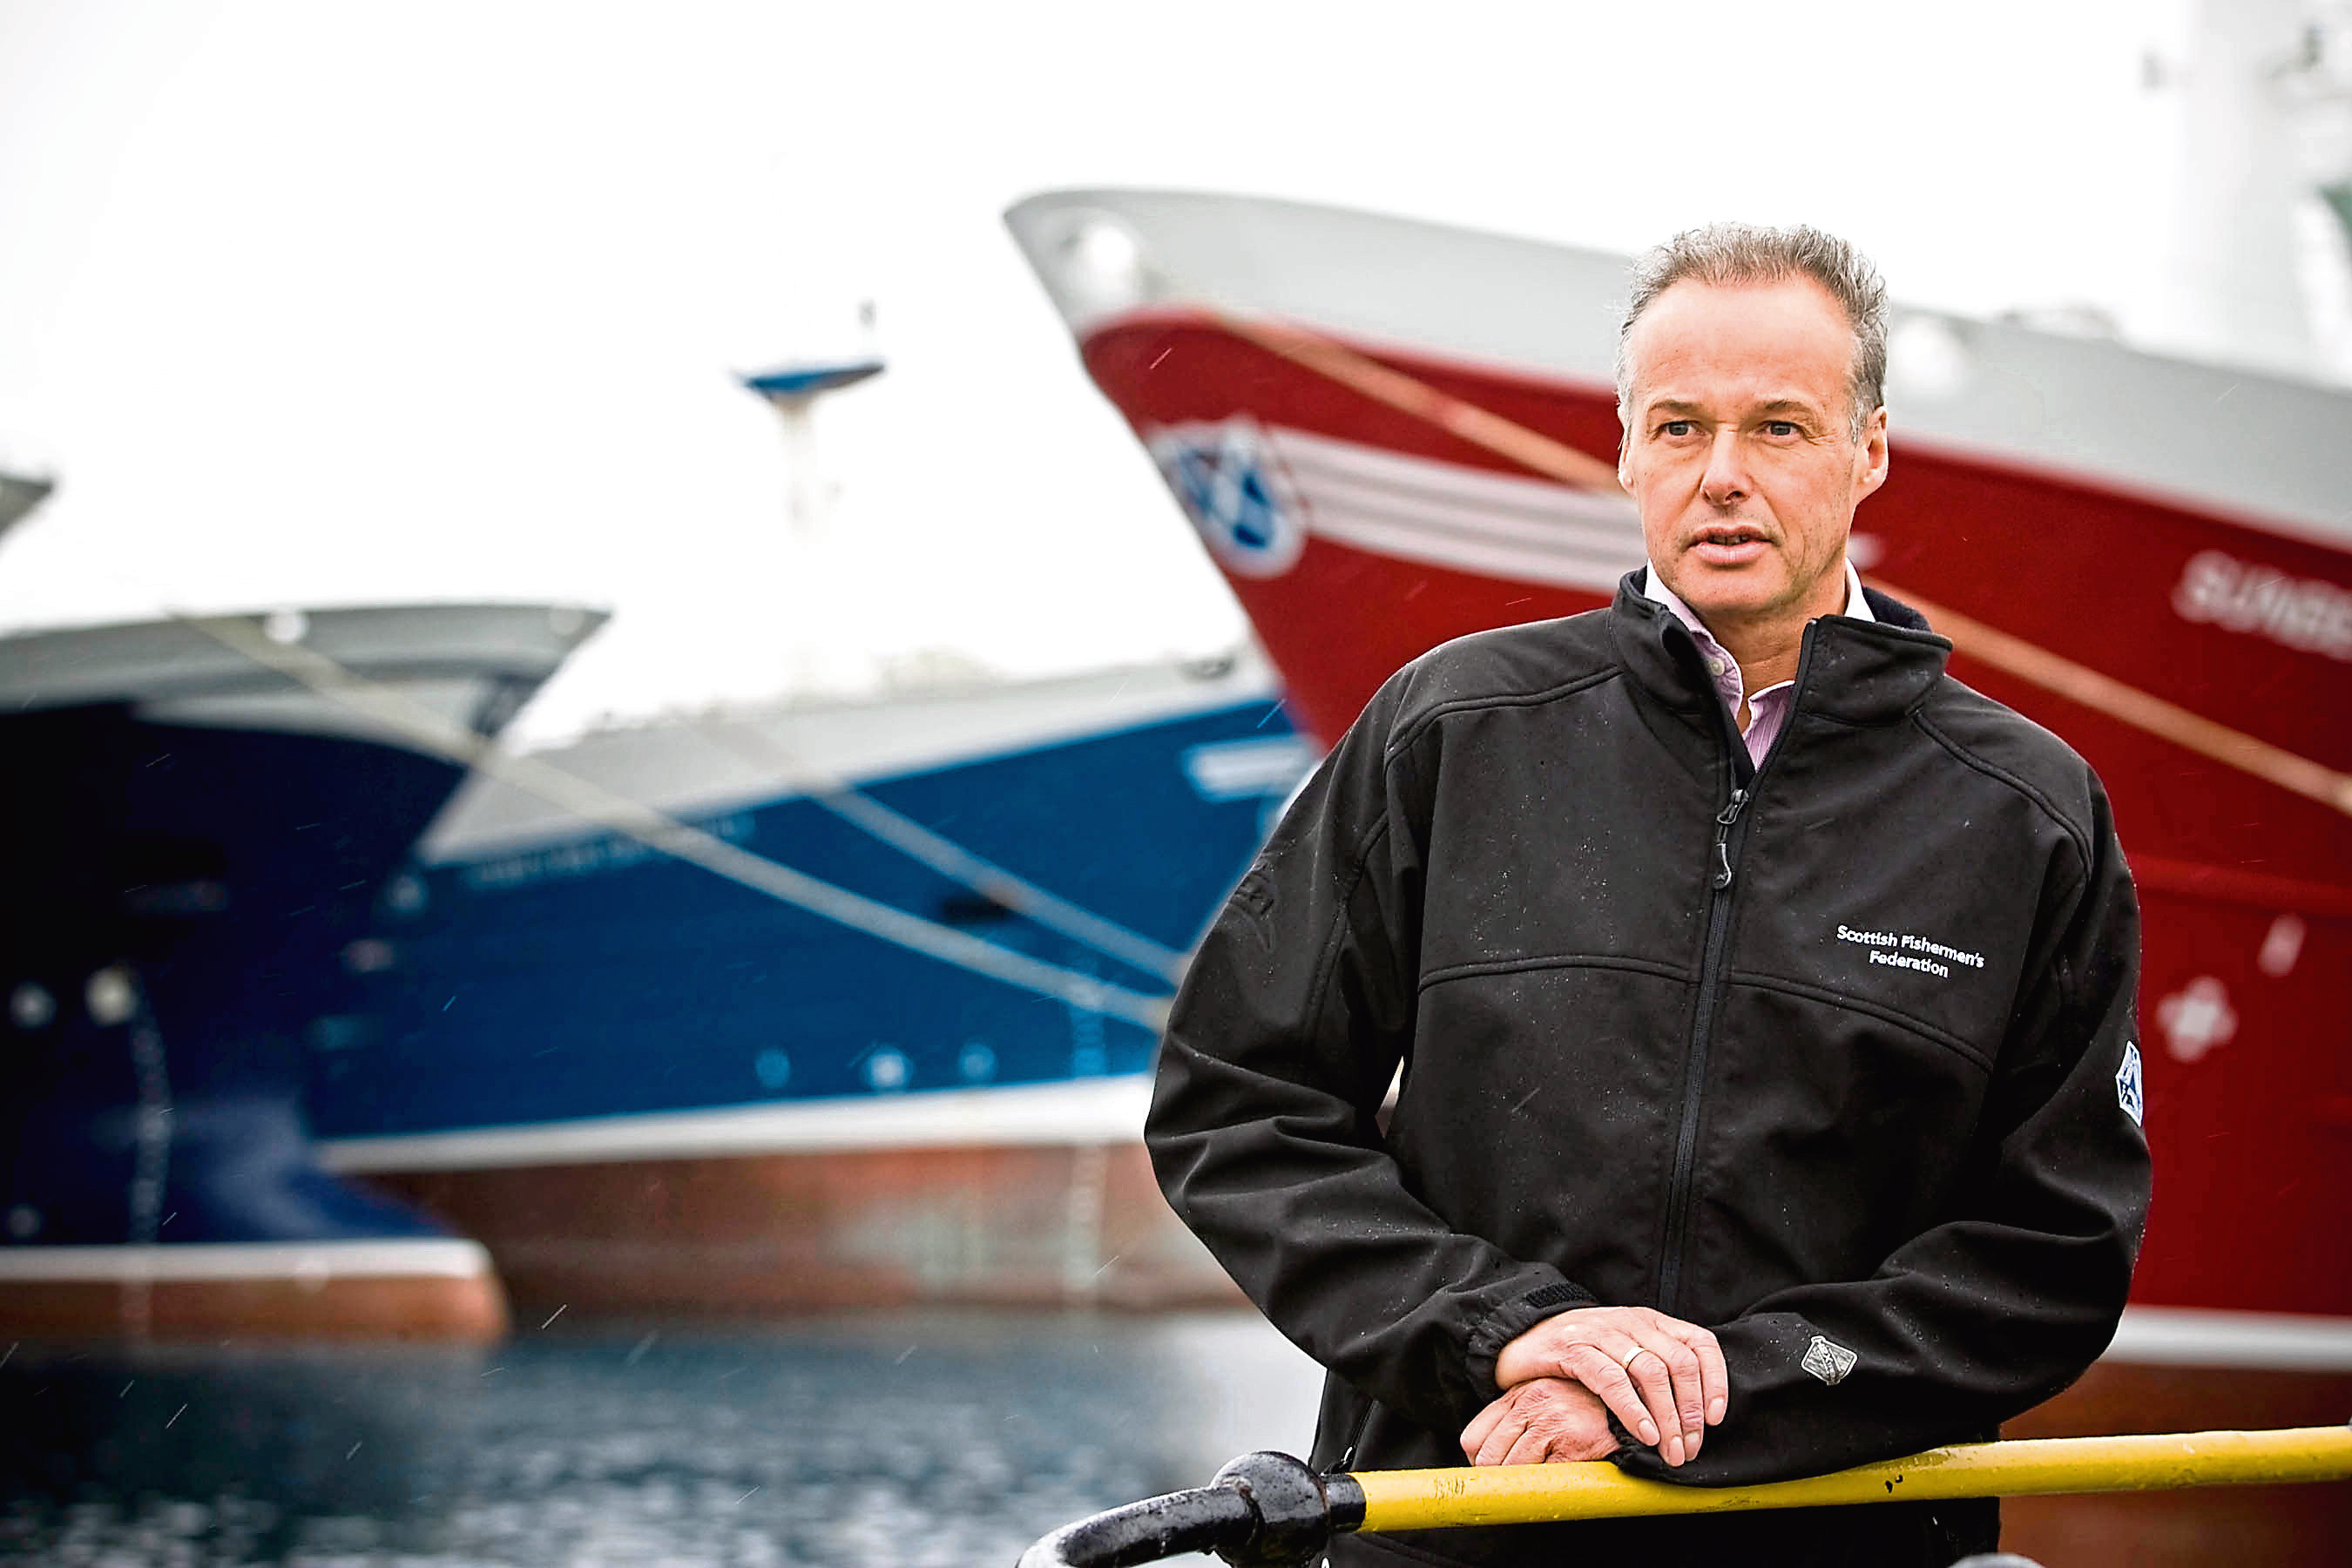 MEETING OF THE SKIPPERS OF SCOTLANDS PELAGIC FLEET IN FRASERBURGH. 

PIC OF IAN GATT CHIEF EXECUTIVE OF THE SPFA, AT FRASERBURGH HARBOUR WITH PELAGIC FISHING BOATS.

PIC BY LEX BALLANTYNE / NEWSLINE SCOTLAND